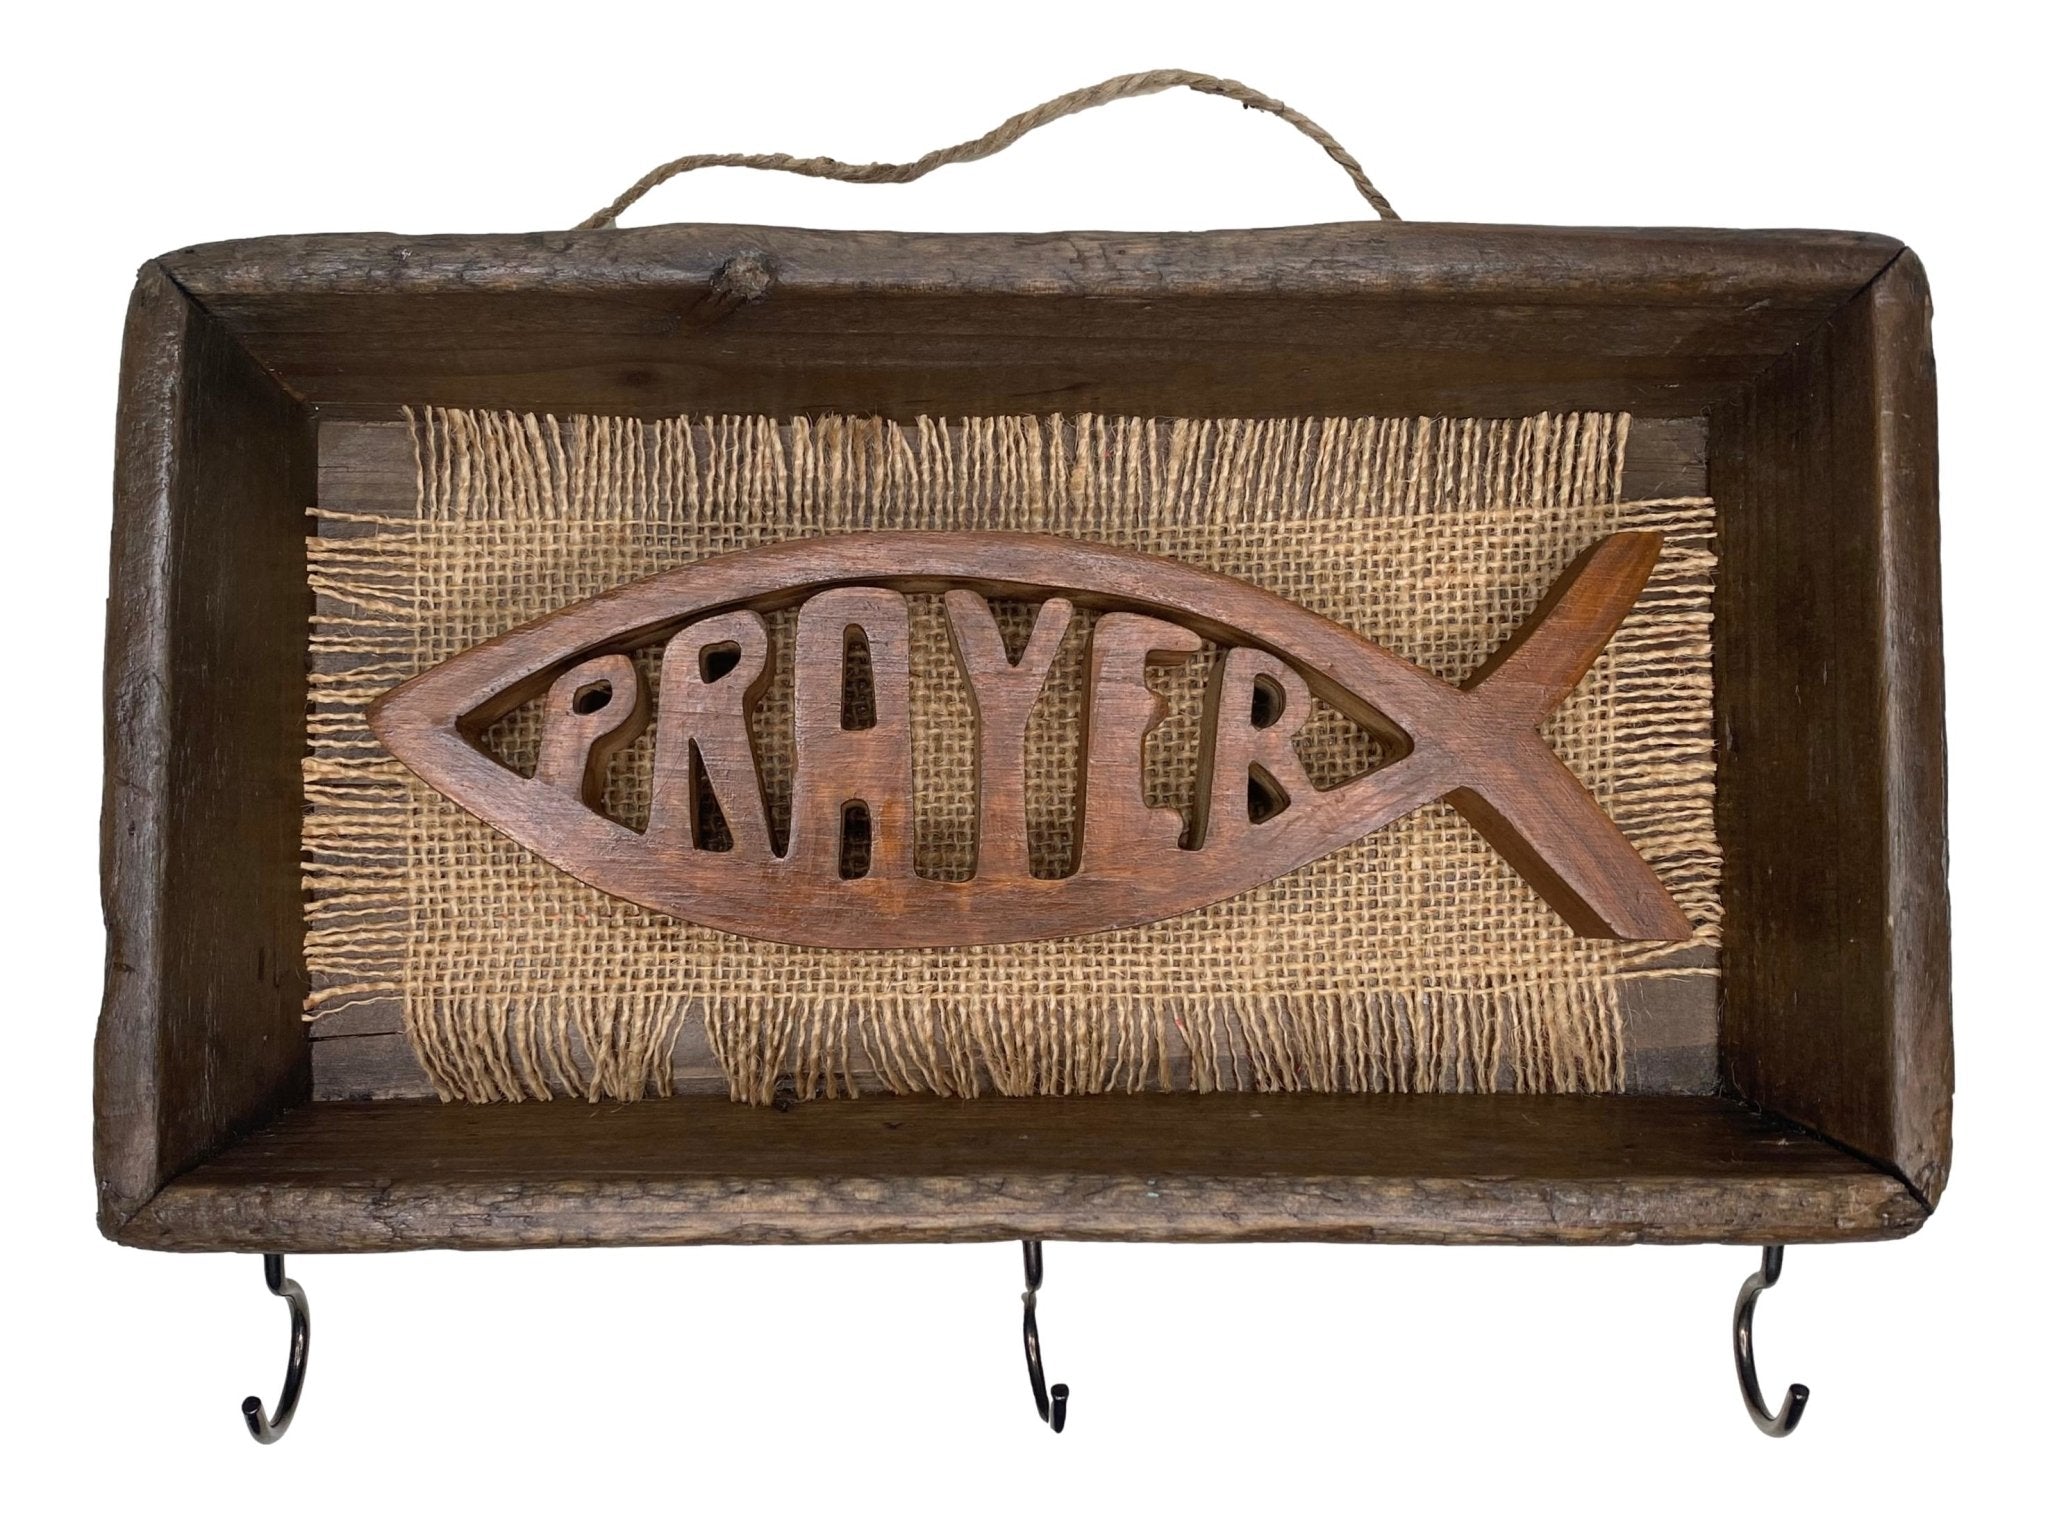 Rosary Holder Wood Frame Wood Prayer Fish Symbol Handcrafted by Local Artist Norma 10 1/4 L x 2 W x 7 H Inches - Ysleta Mission Gift Shop- VOTED 2022 El Paso's Best Gift Shop